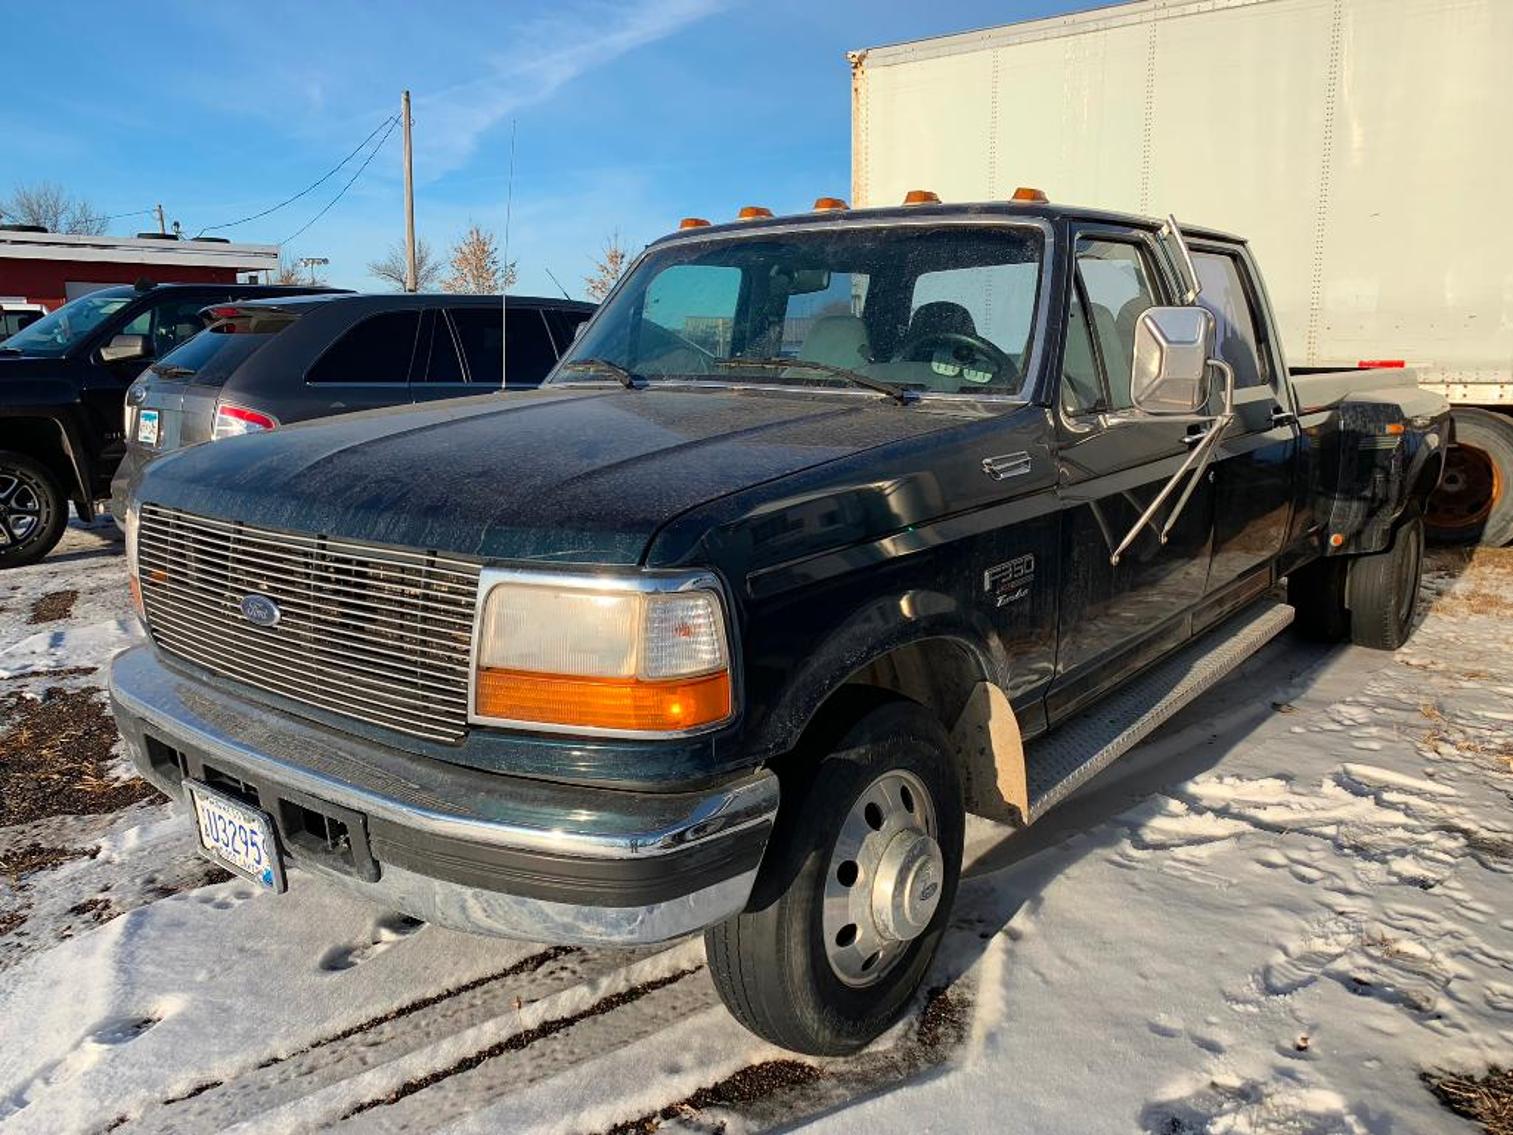 2000 Ford F-350 Tow Truck, 1996 Ford F-350, 2001 Ford Focus